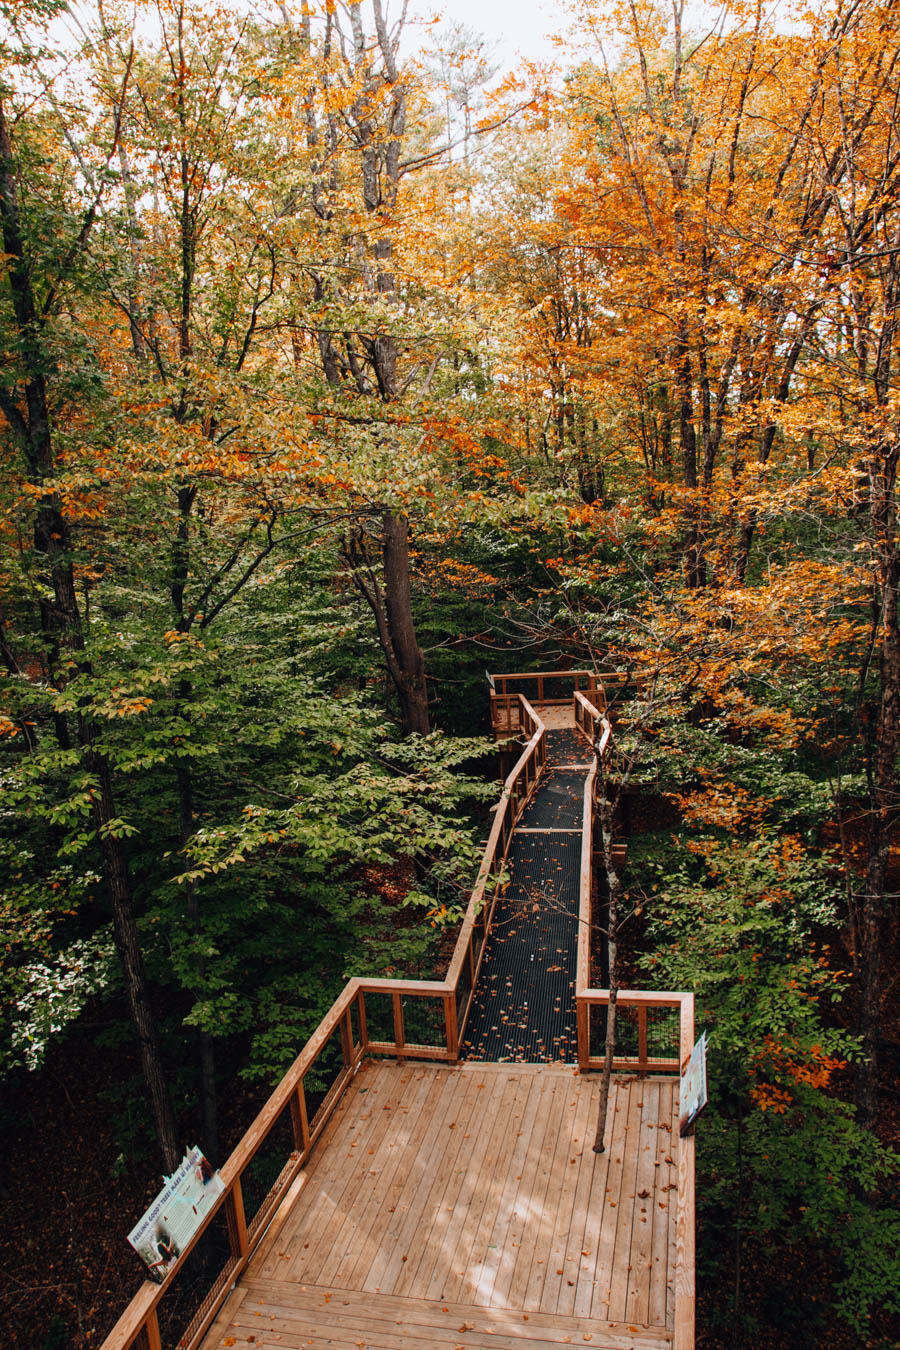 The Vermont Institute of Natural Science Forest Canopy Walk